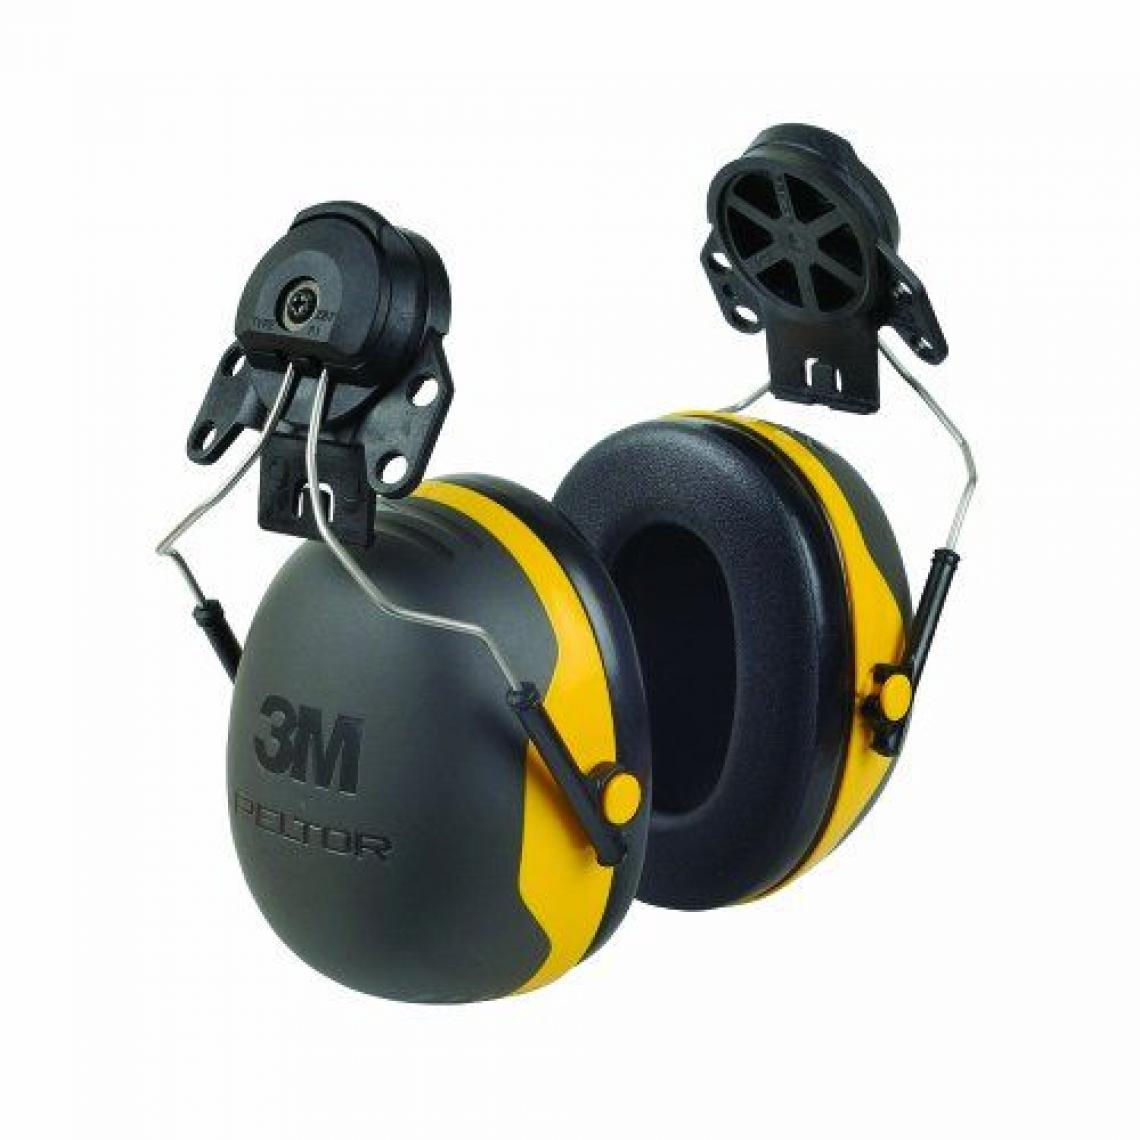 Inconnu - Peltor X2 (attaches-casque) - Protections tête